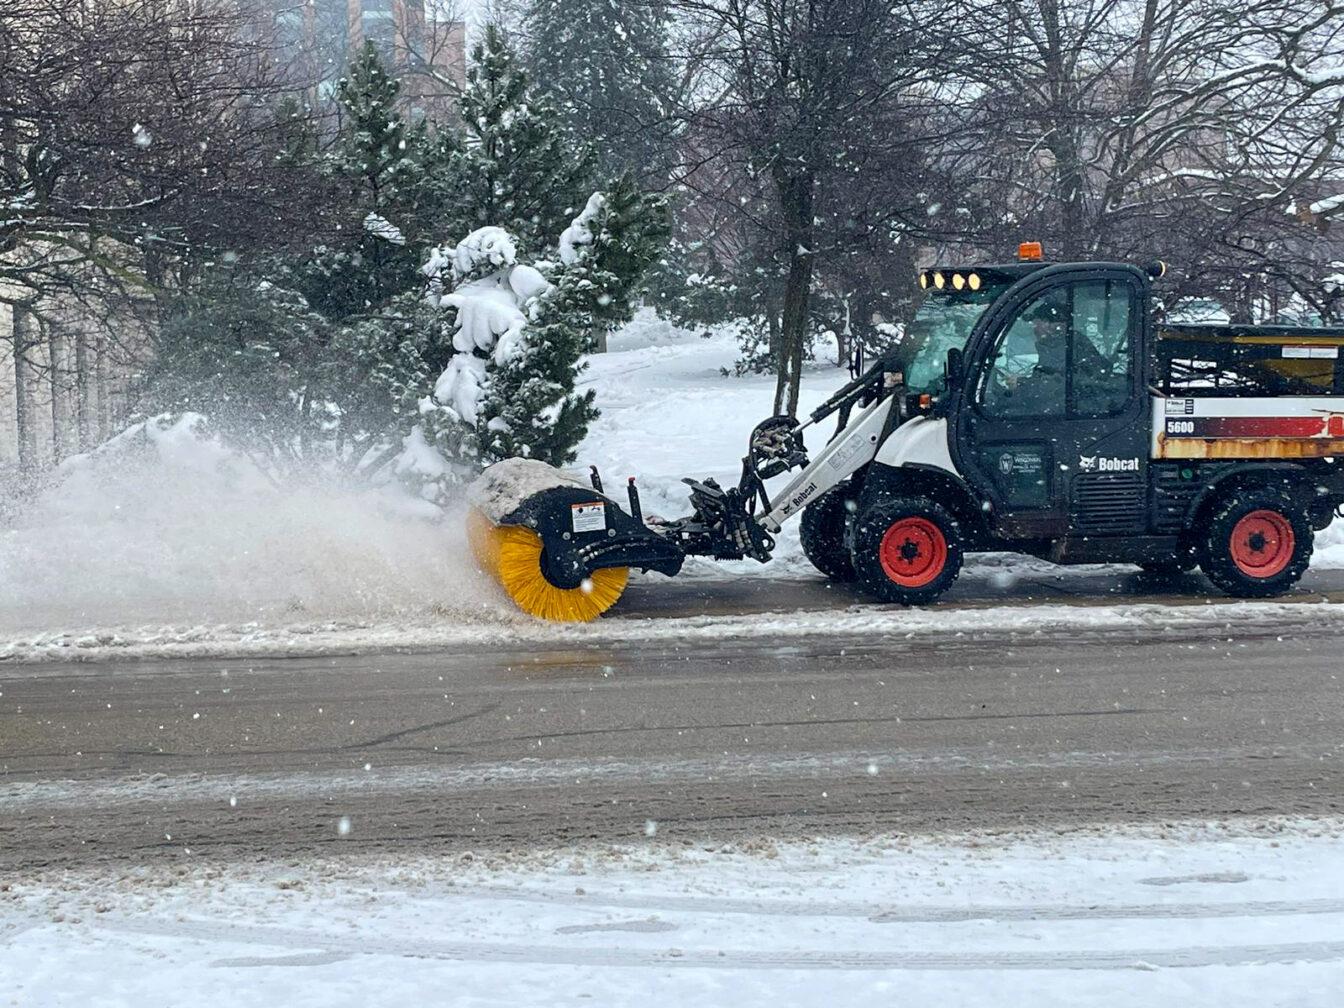 City of Madison works to improve road conditions, prevent weather-related accidents